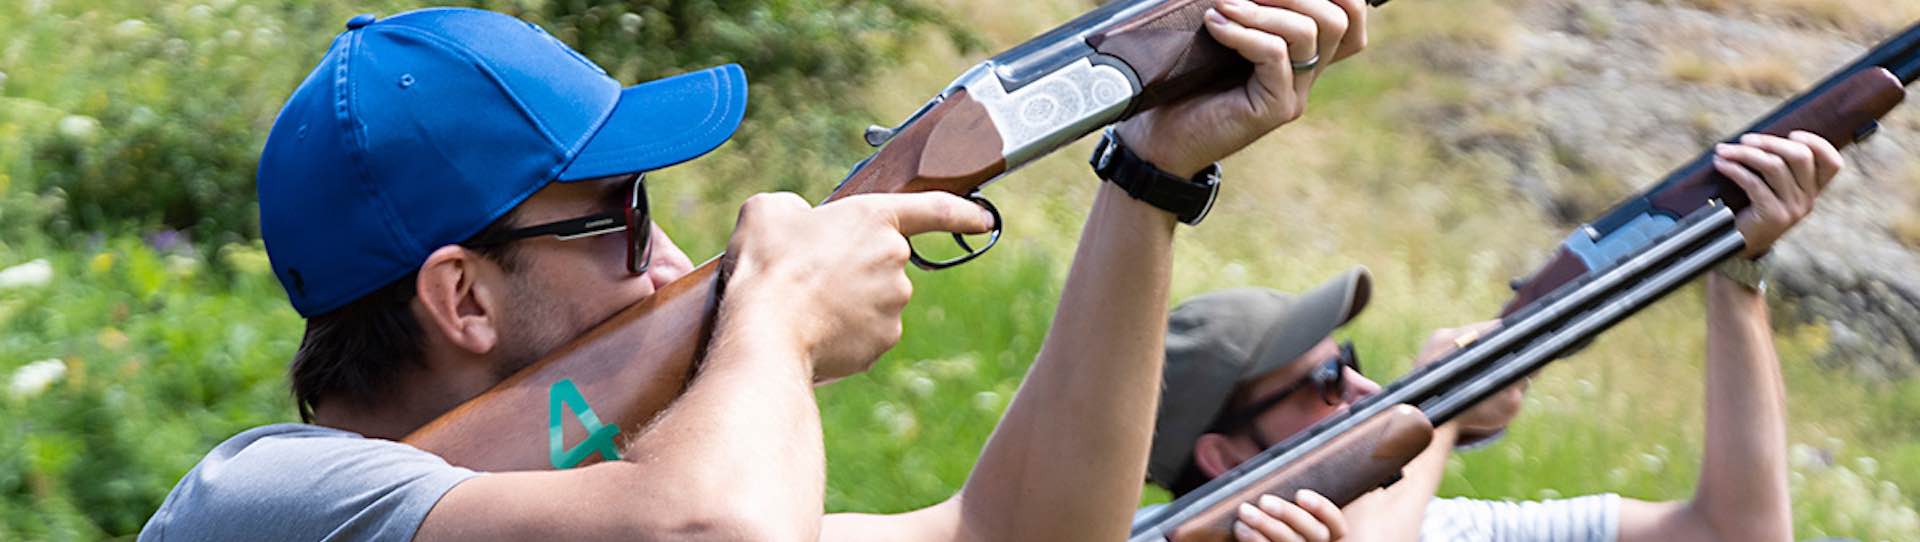 Clay Pigeon Shooting Melbourne | Bucks Day Party Ideas ...